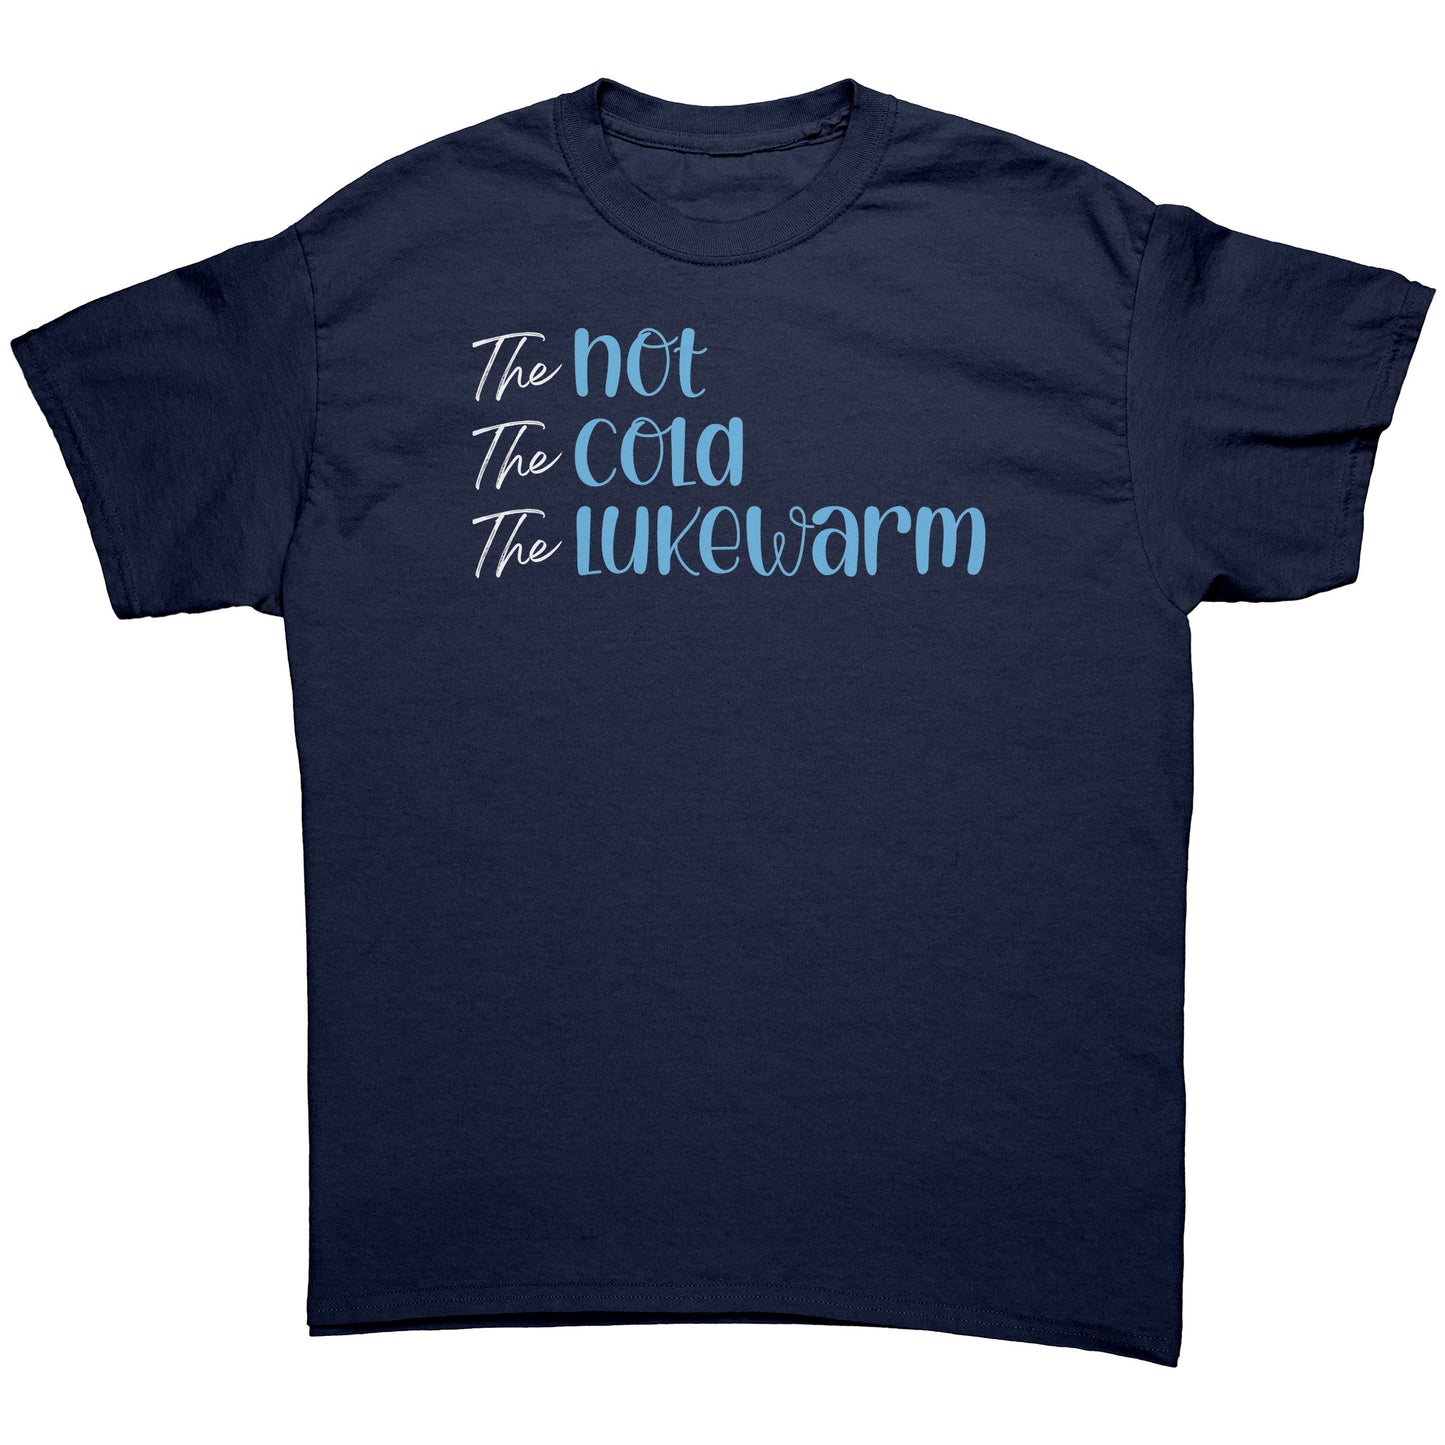 The Hot, The Cold, The Lukewarm Men's T-Shirt Part 2